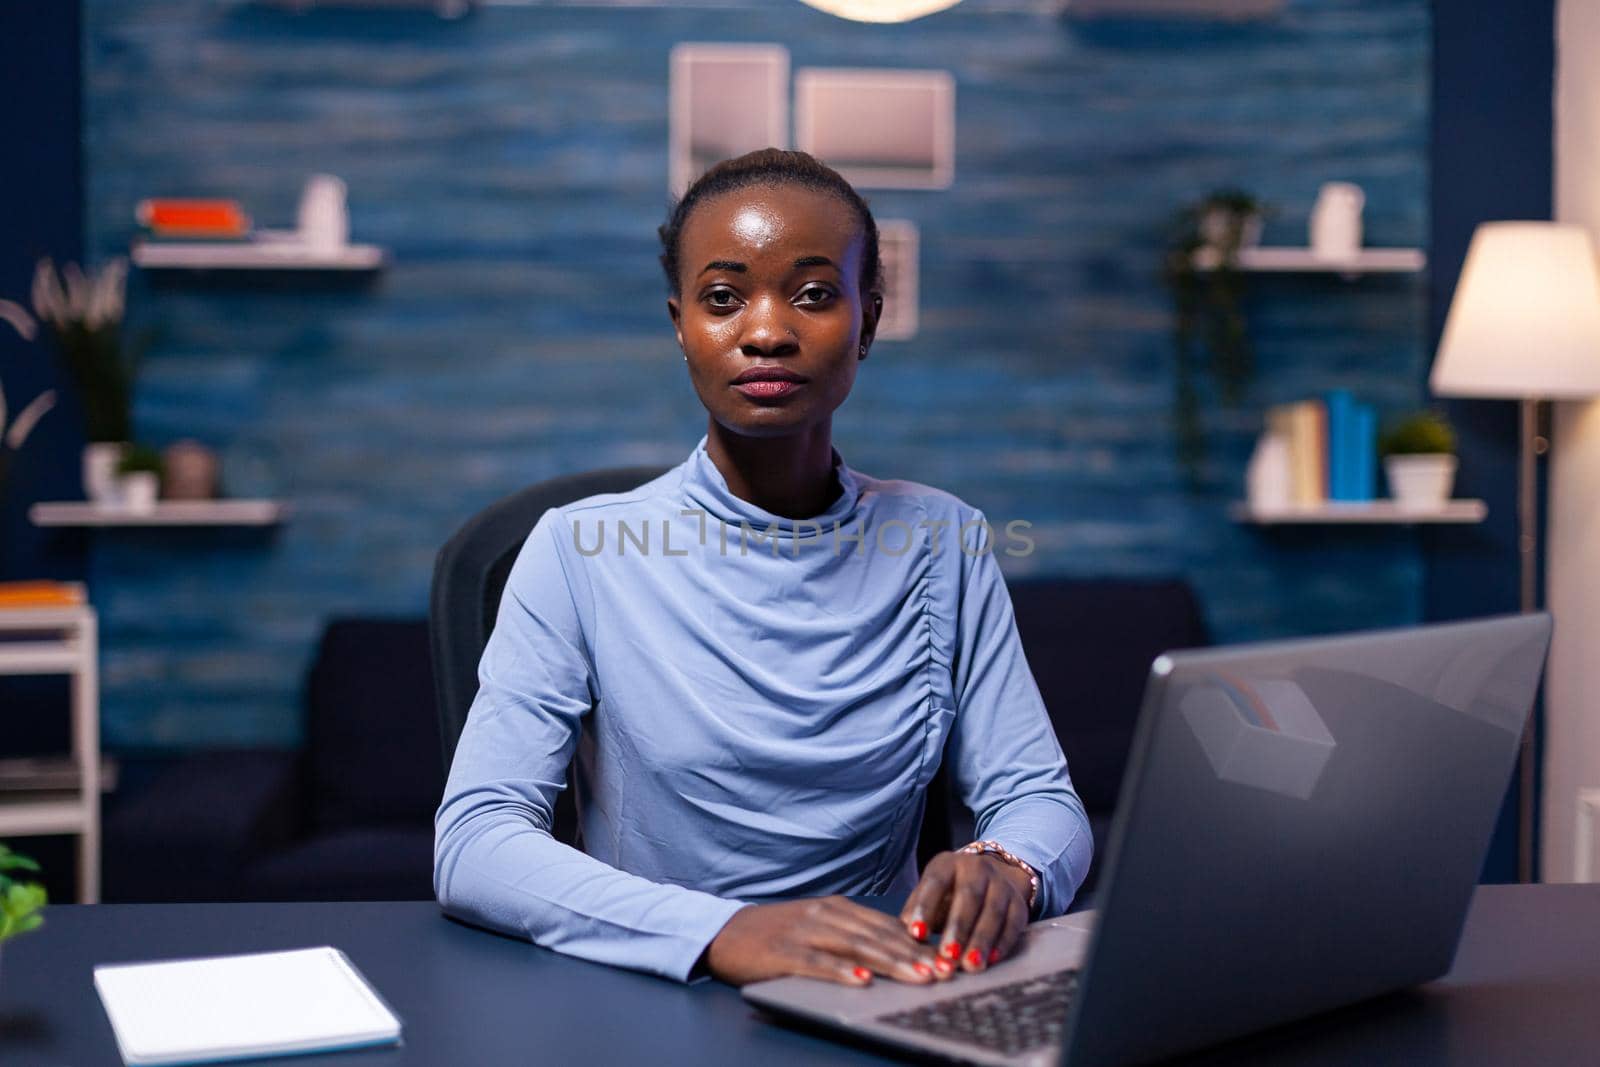 African business woman looking seriously at camera in the course of working on project. Black entrepreneur sitting in personal workplace writing on keyboard.